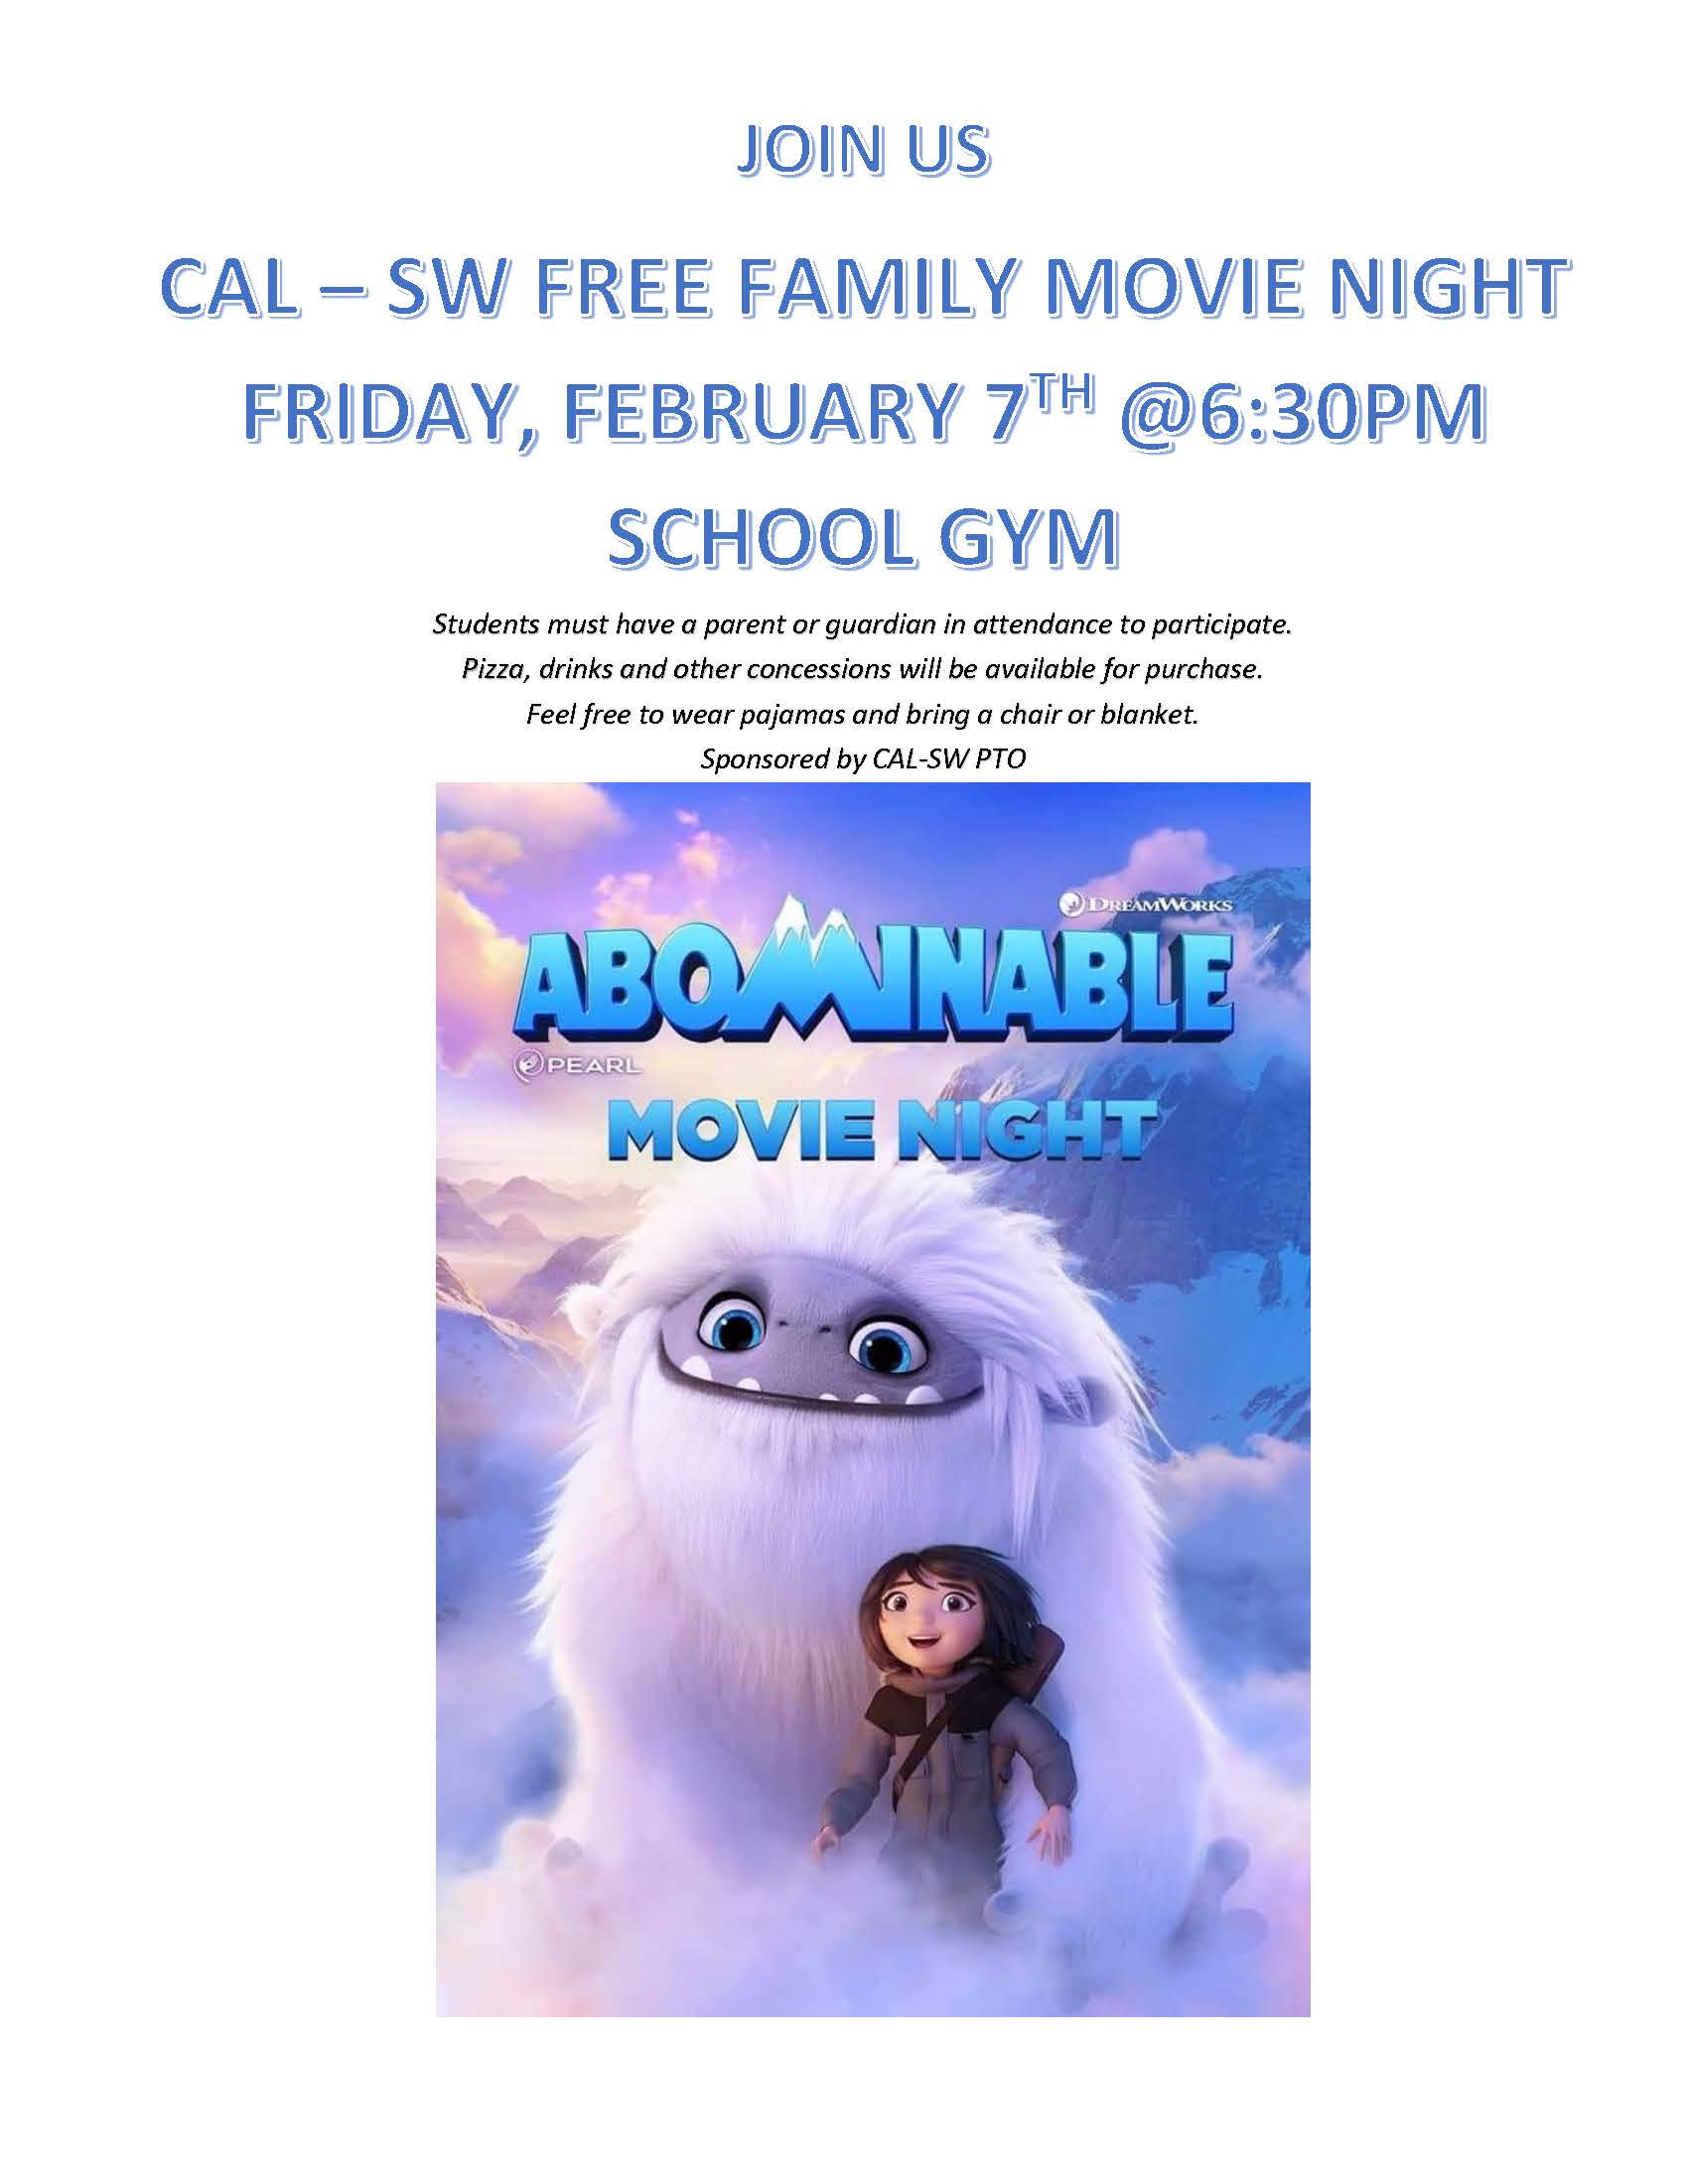 Christian Academy School System | Family Movie Night | February 7 | Abominable